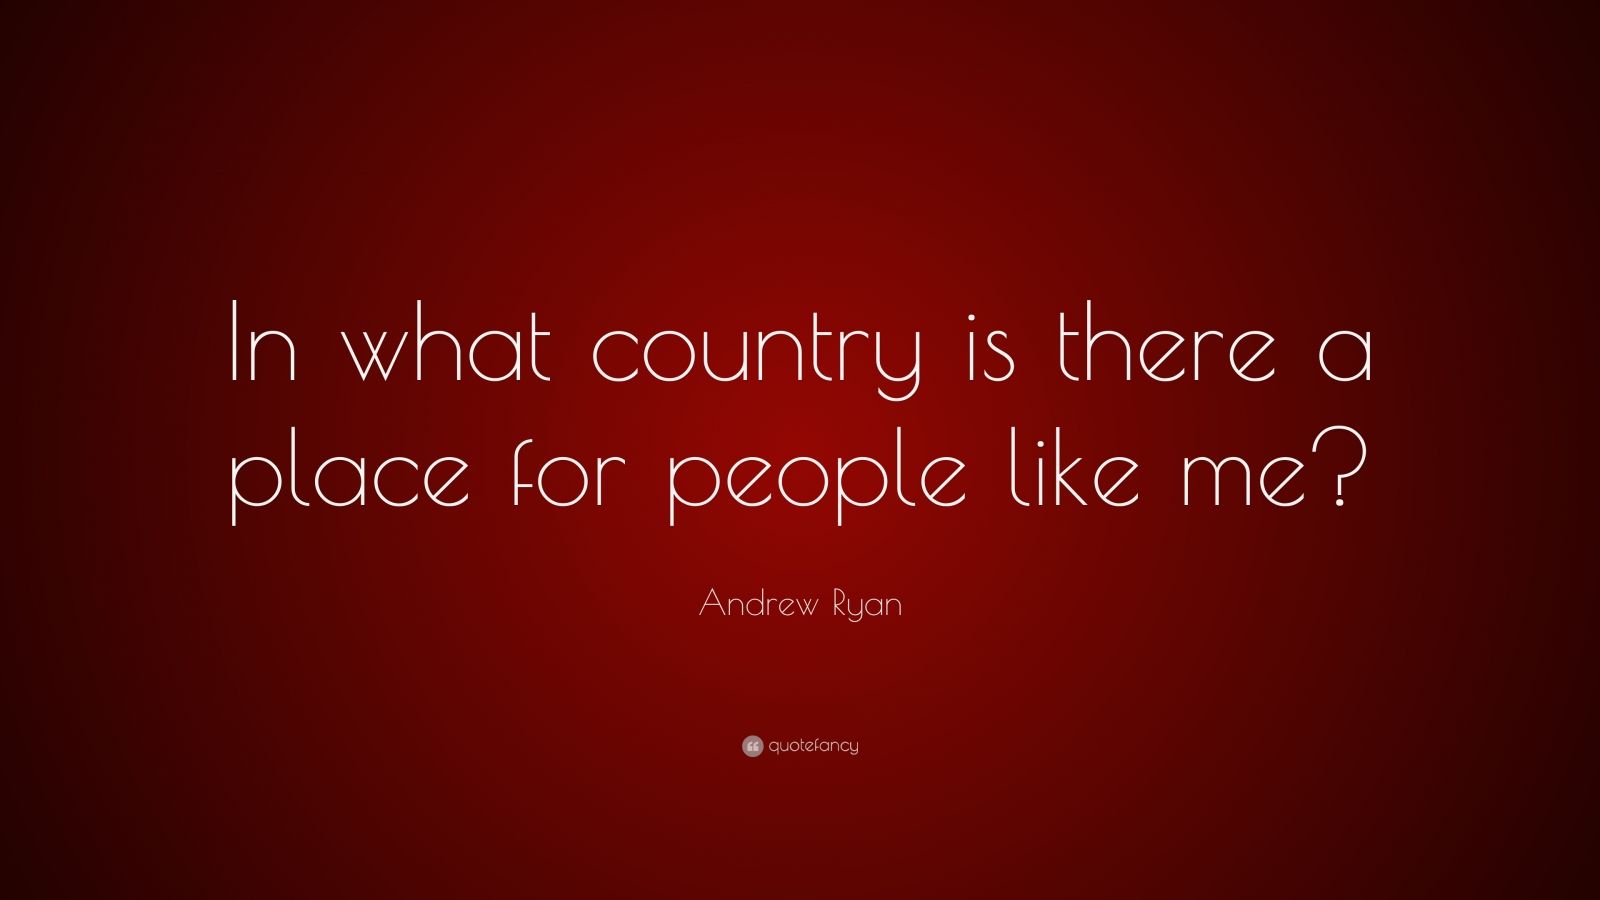 Andrew Ryan Quote: "In what country is there a place for people like me?" (7 wallpapers ...